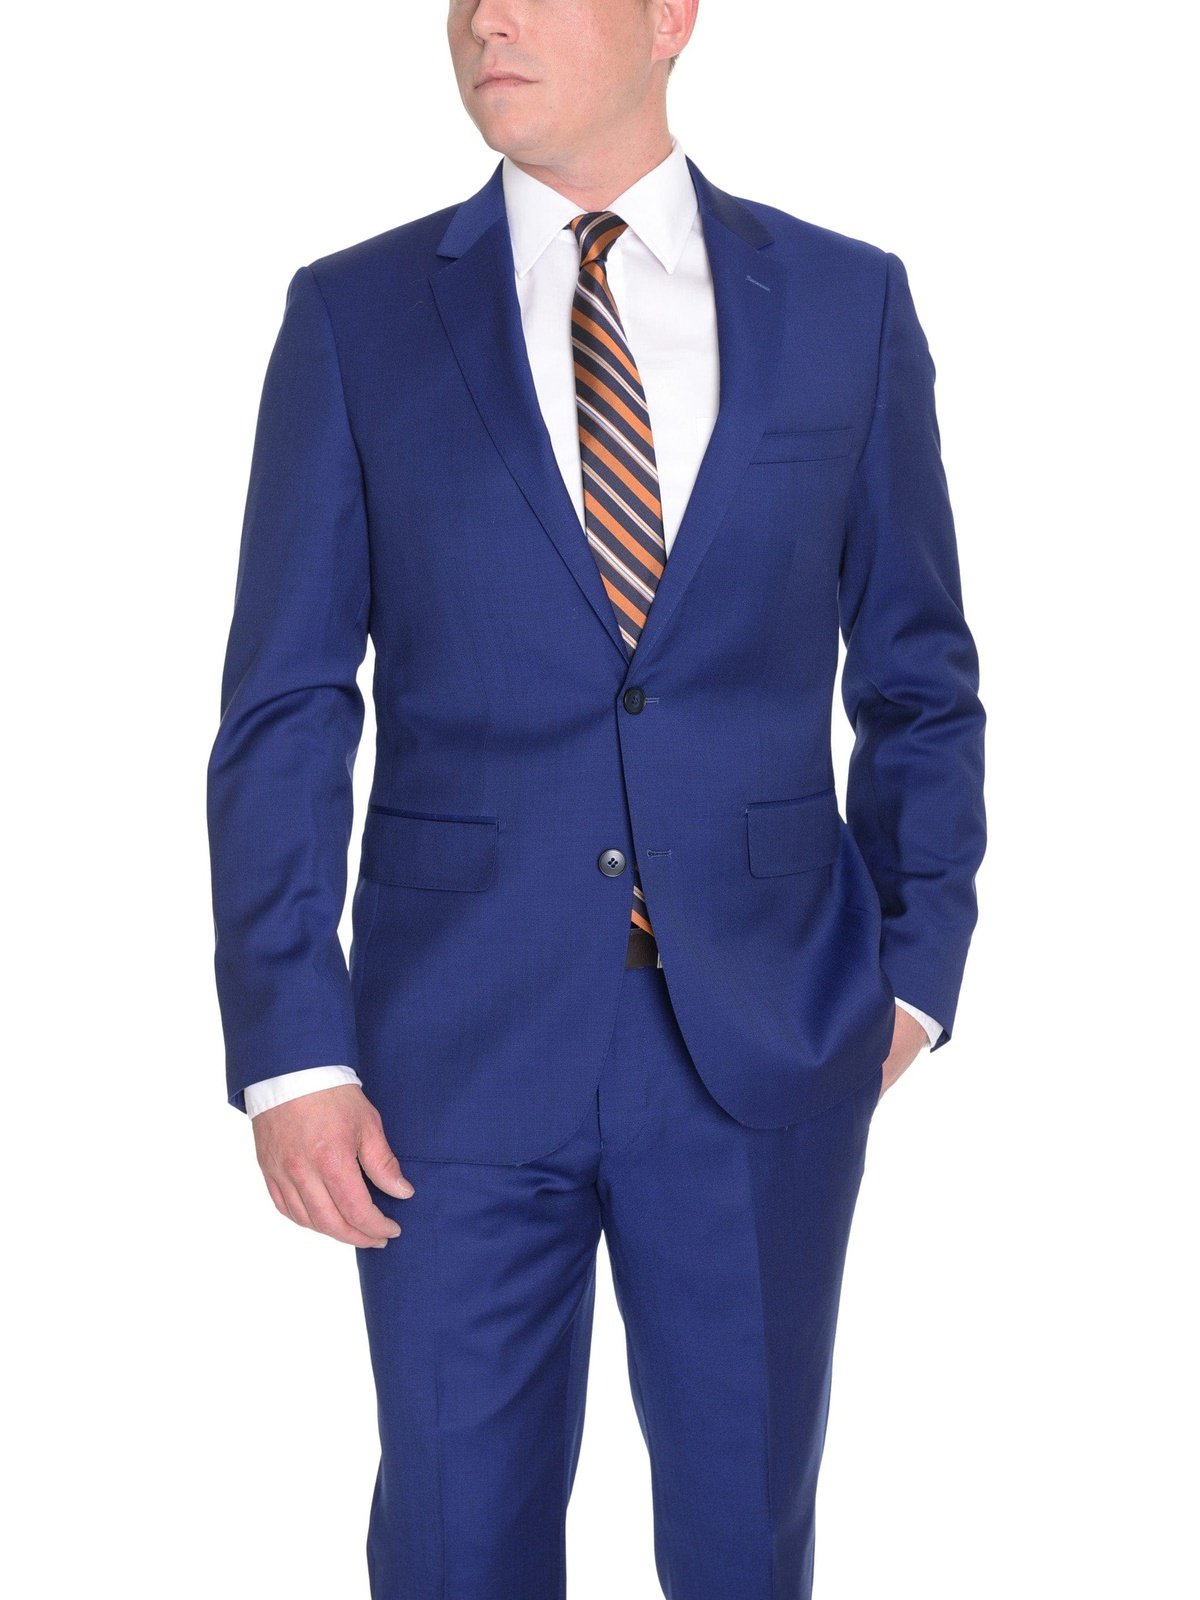 London Fog TWO PIECE SUITS Extra Slim Fit Solid Royal Blue Two Button Wool Suit